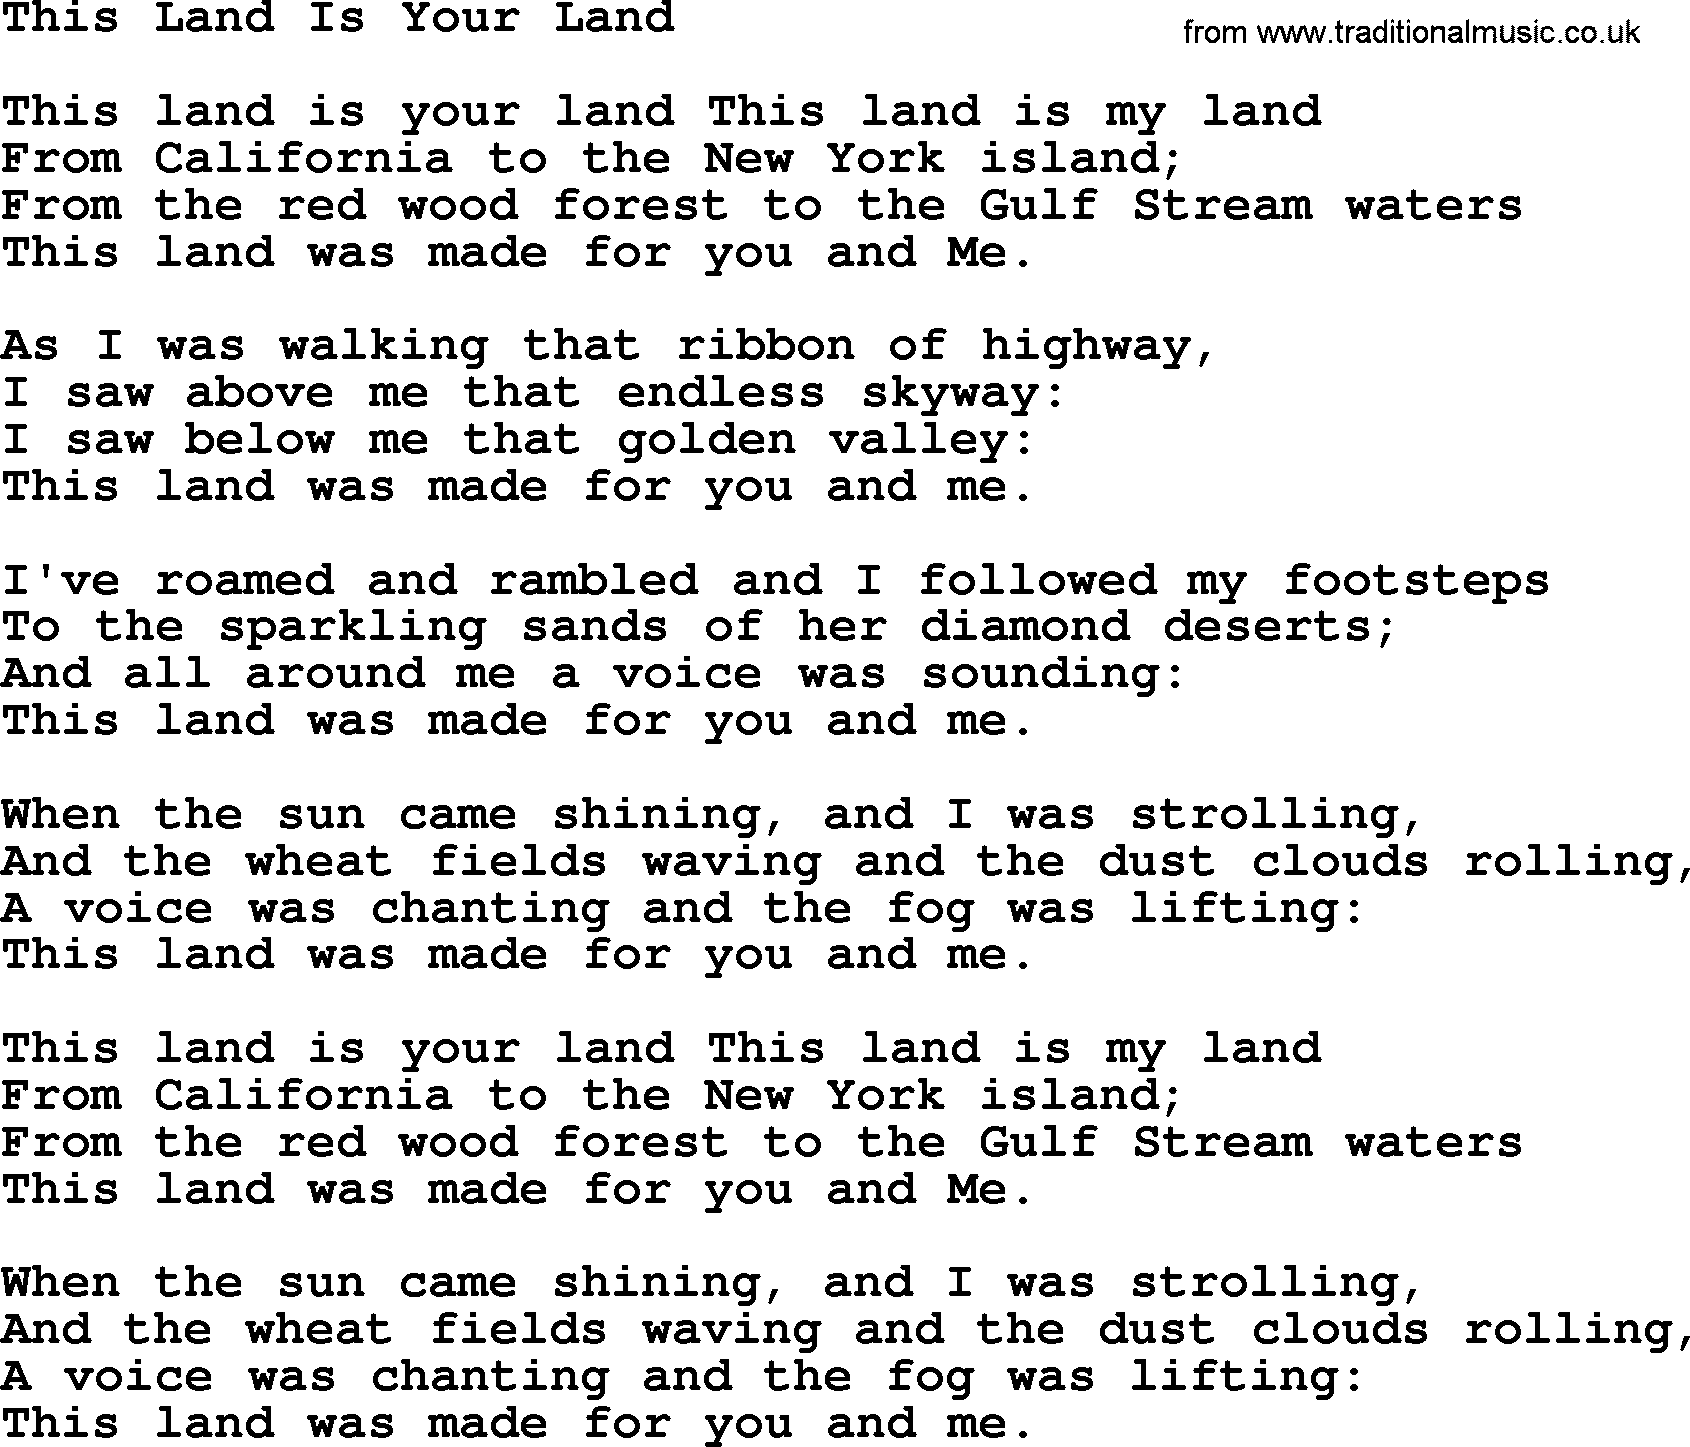 Woody Guthrie song This Land Is Your Land lyrics